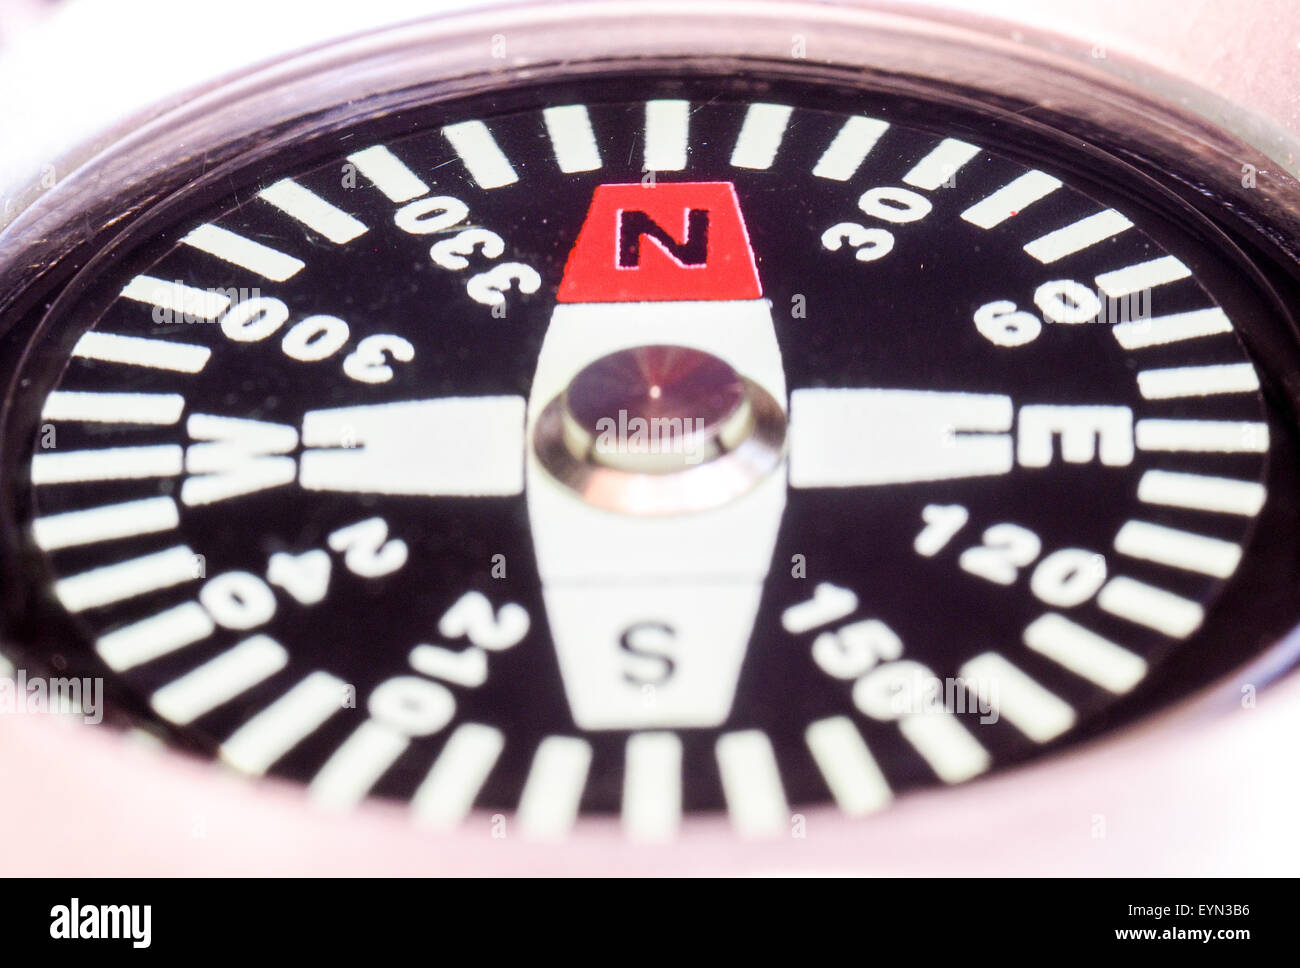 Closeup view of the screen of a compass with North direction indicating by red arrow Stock Photo